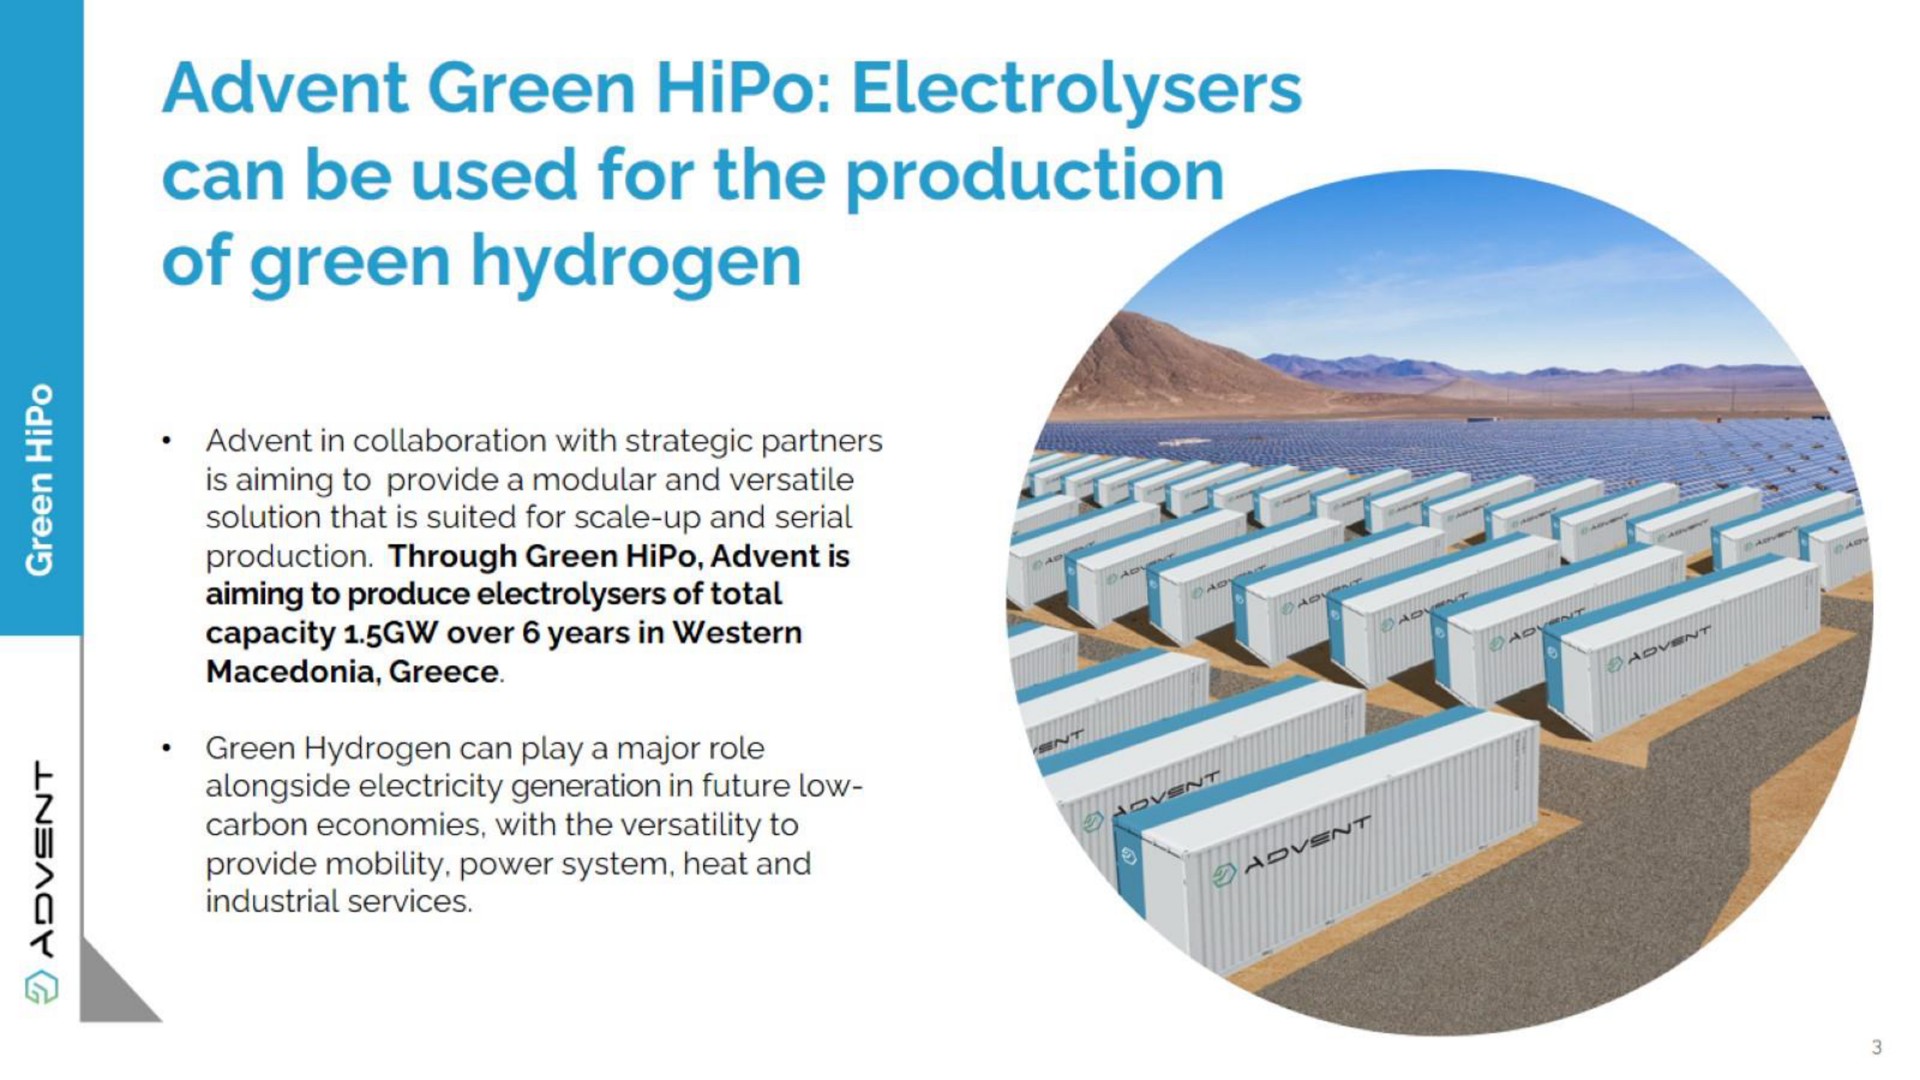 green can be used for the production of green hydrogen | Advent